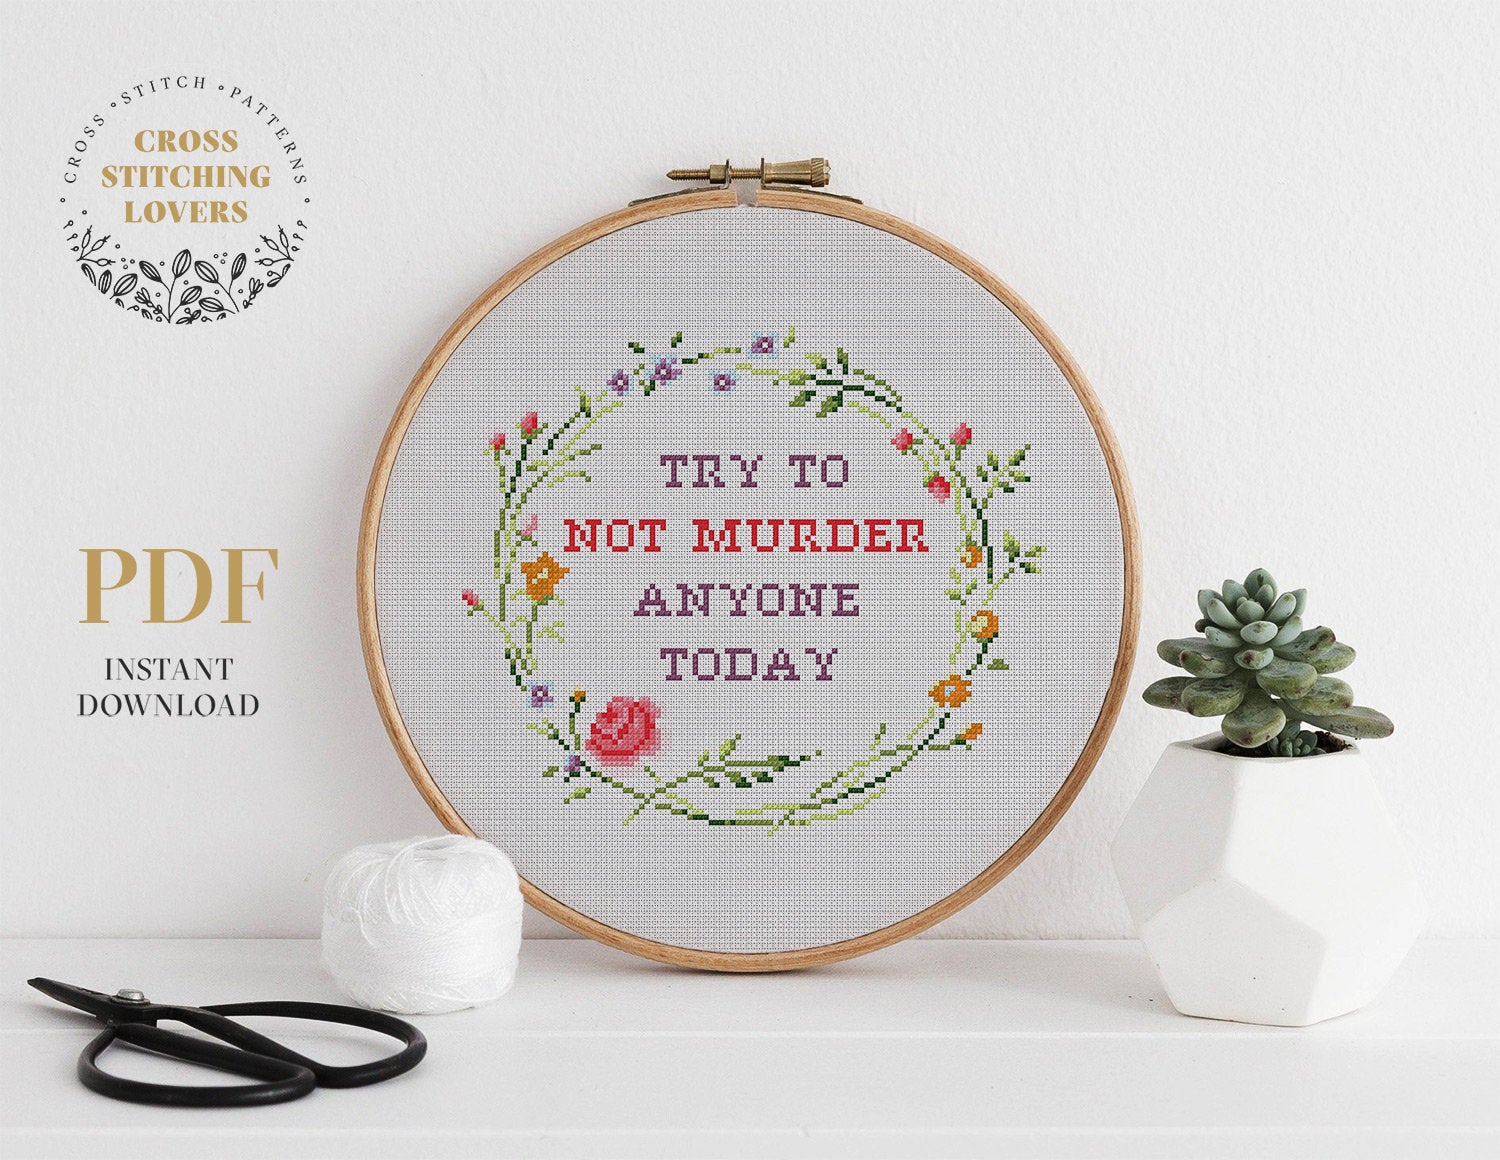 Try to not murder anyone today - Cross stitch pattern